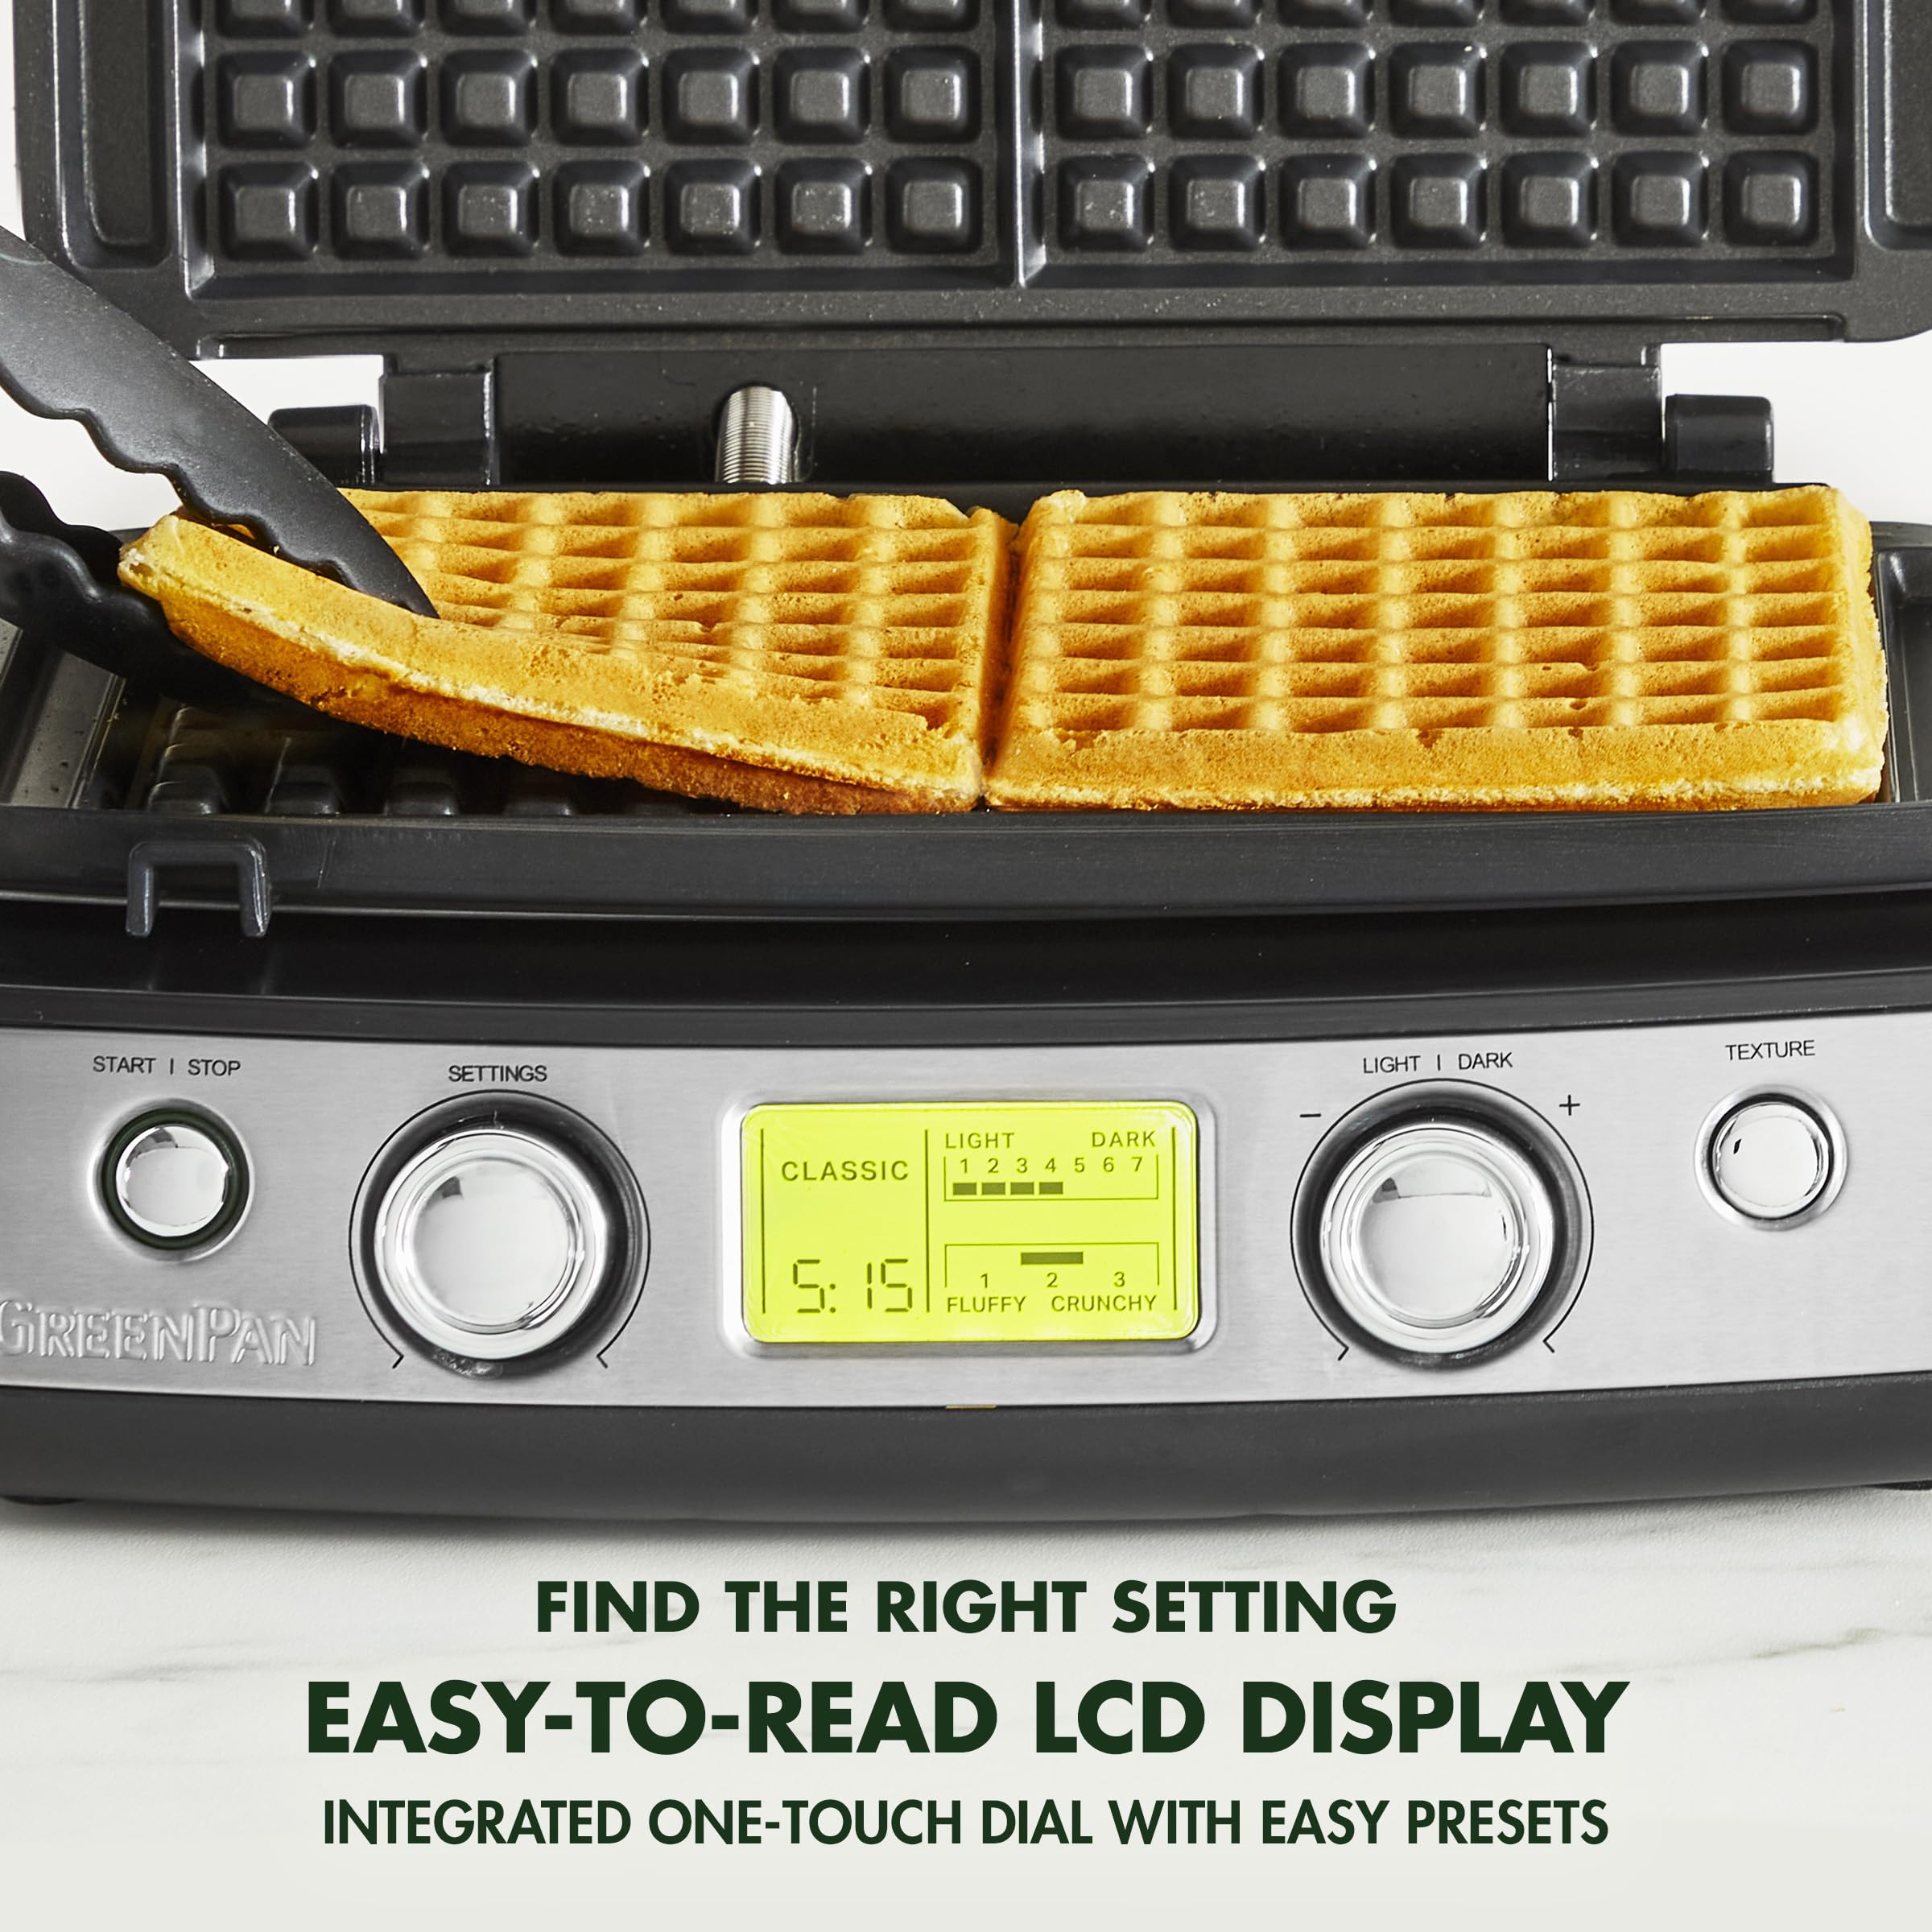 GreenPan Elite 2-Square Belgian & Classic Waffle Iron, Healthy Ceramic Nonstick Aluminum Dishwasher Safe Plates, Adjustable Shade/Crunch Controls, Wont Overflow, Easy Cleanup Breakfast, Black